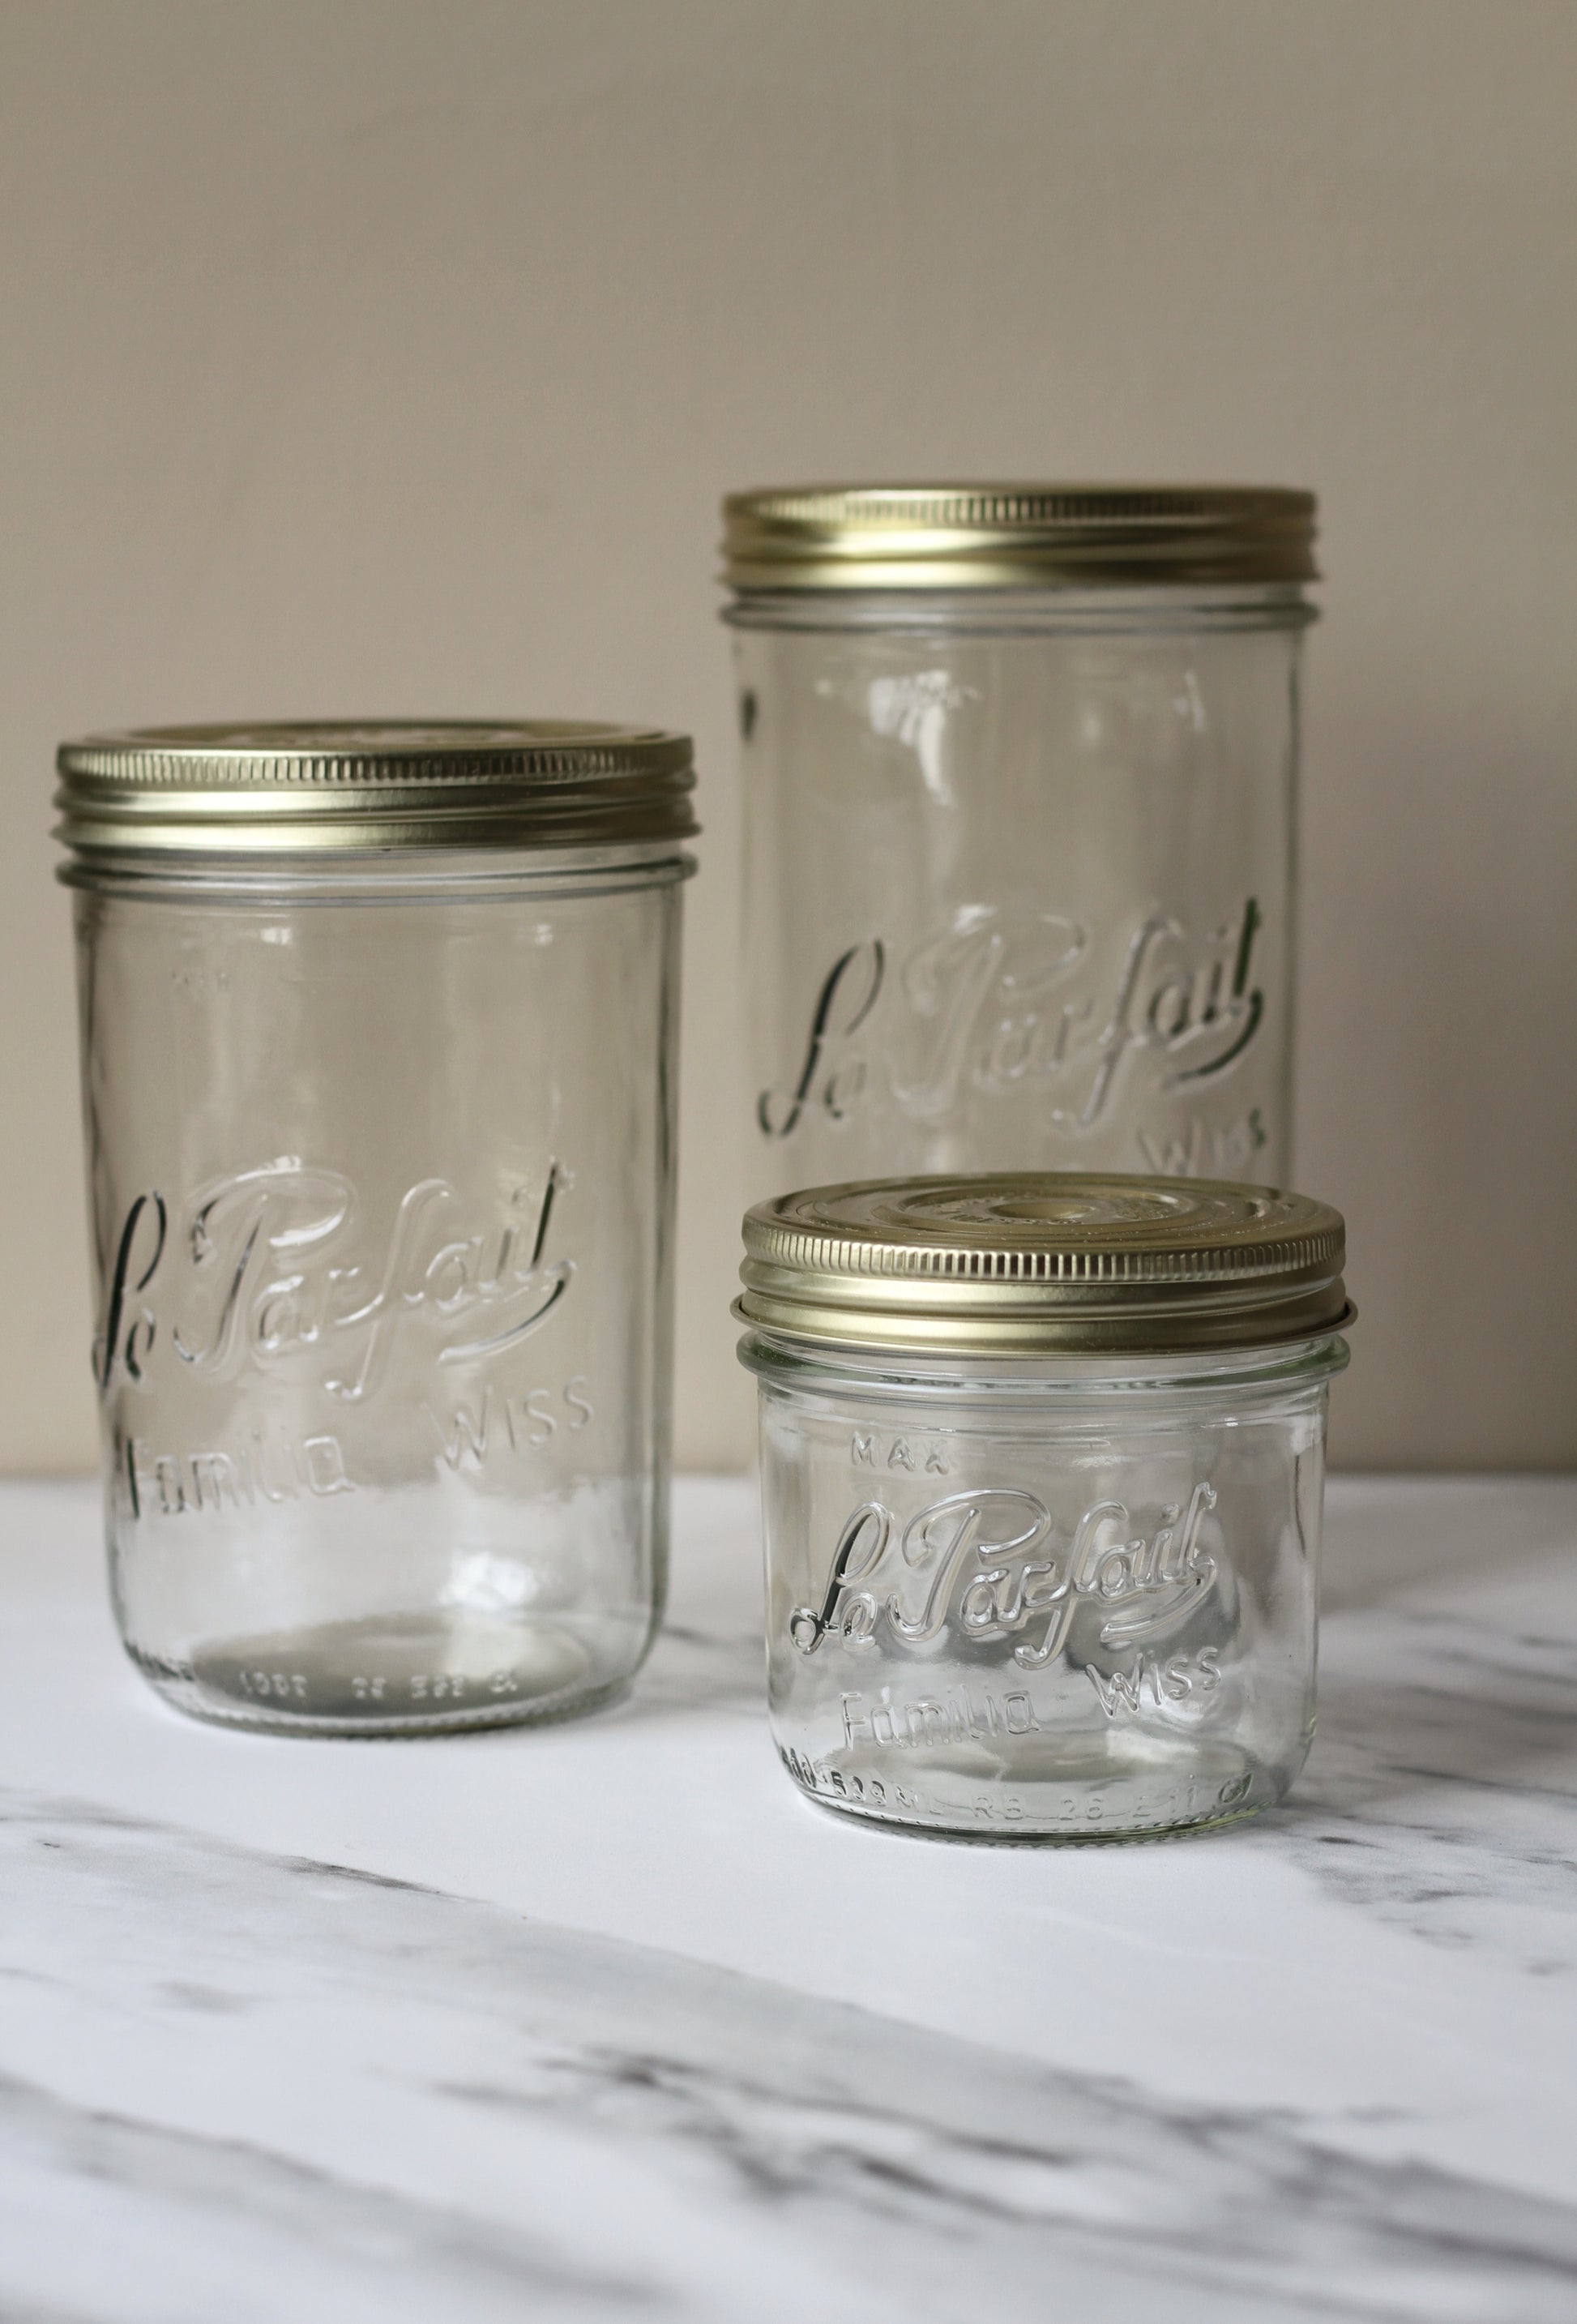 le parfait glass jar with gold twist lid, old fashioned style 